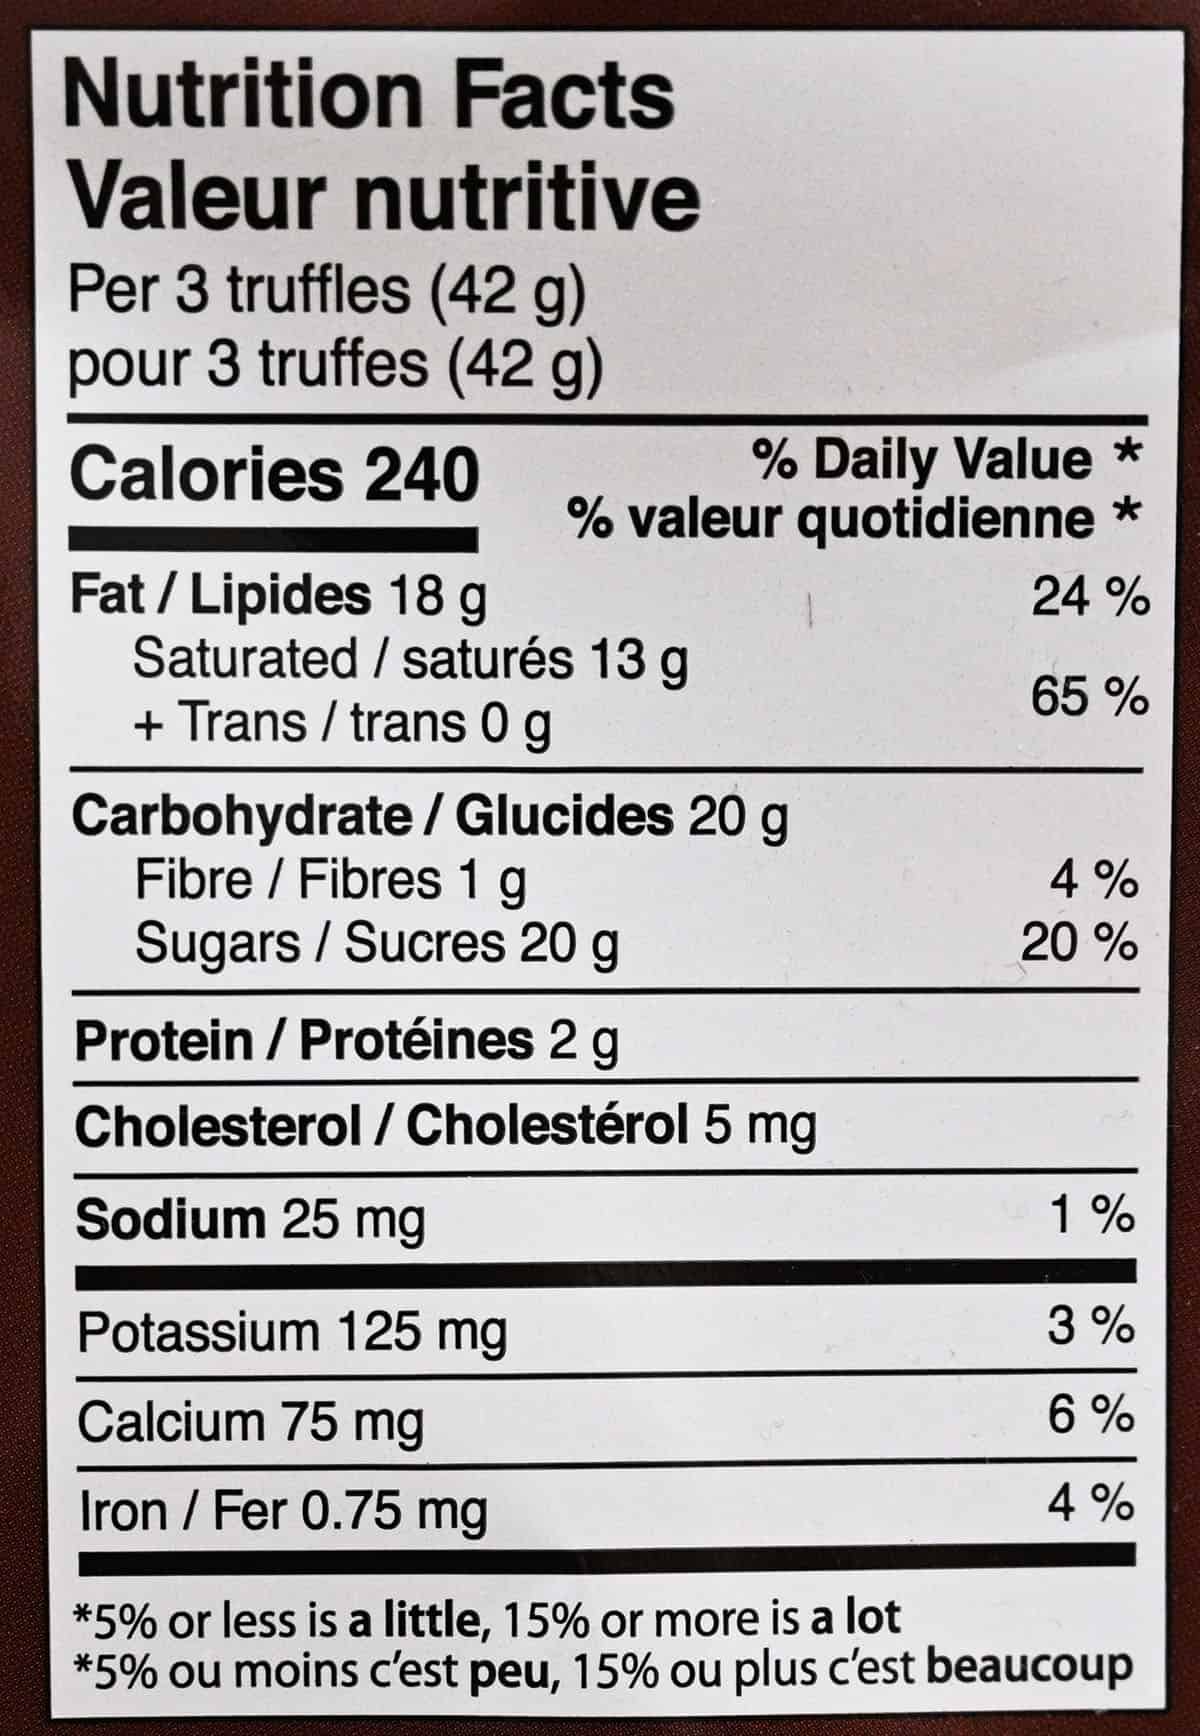 Truffle nutrition facts from the bag.